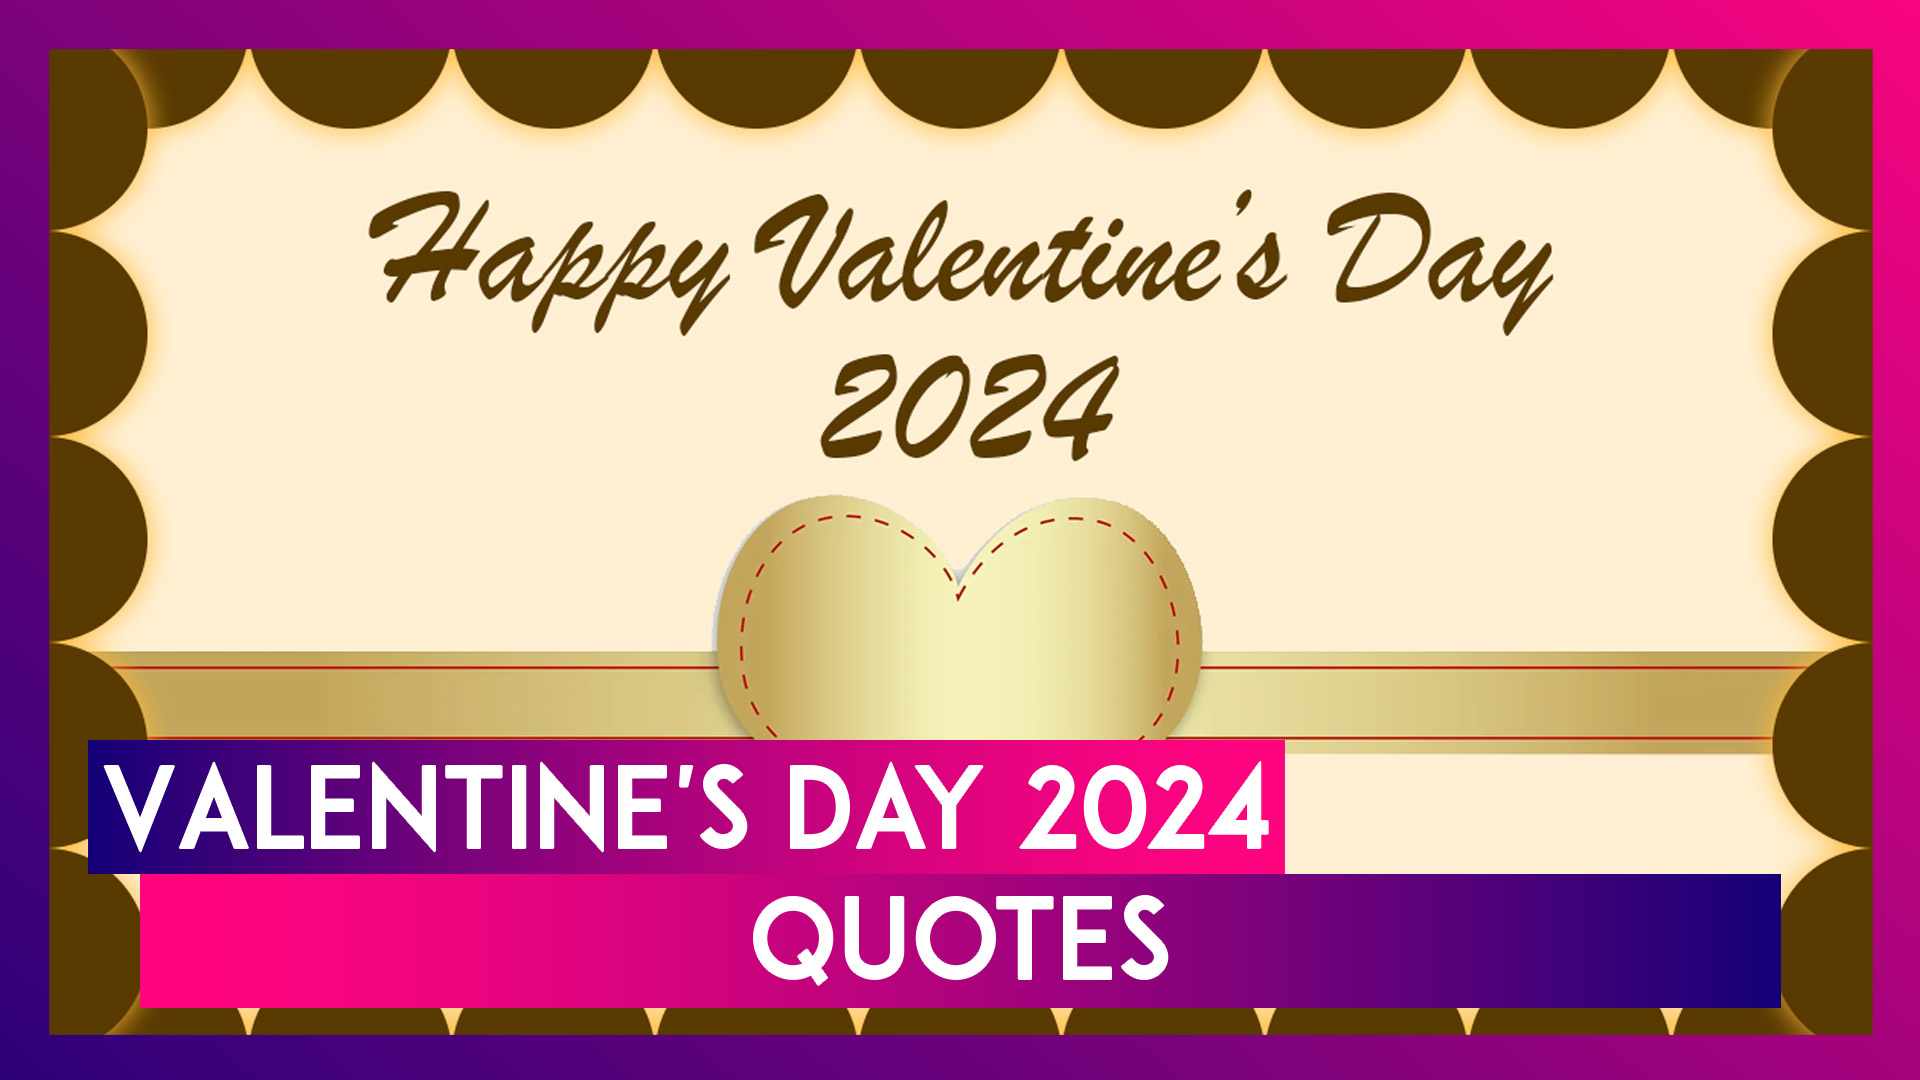 Valentine's Day 2024 Quotes: Wishes, WhatsApp Greetings, Wallpapers & Images To Share on February 14